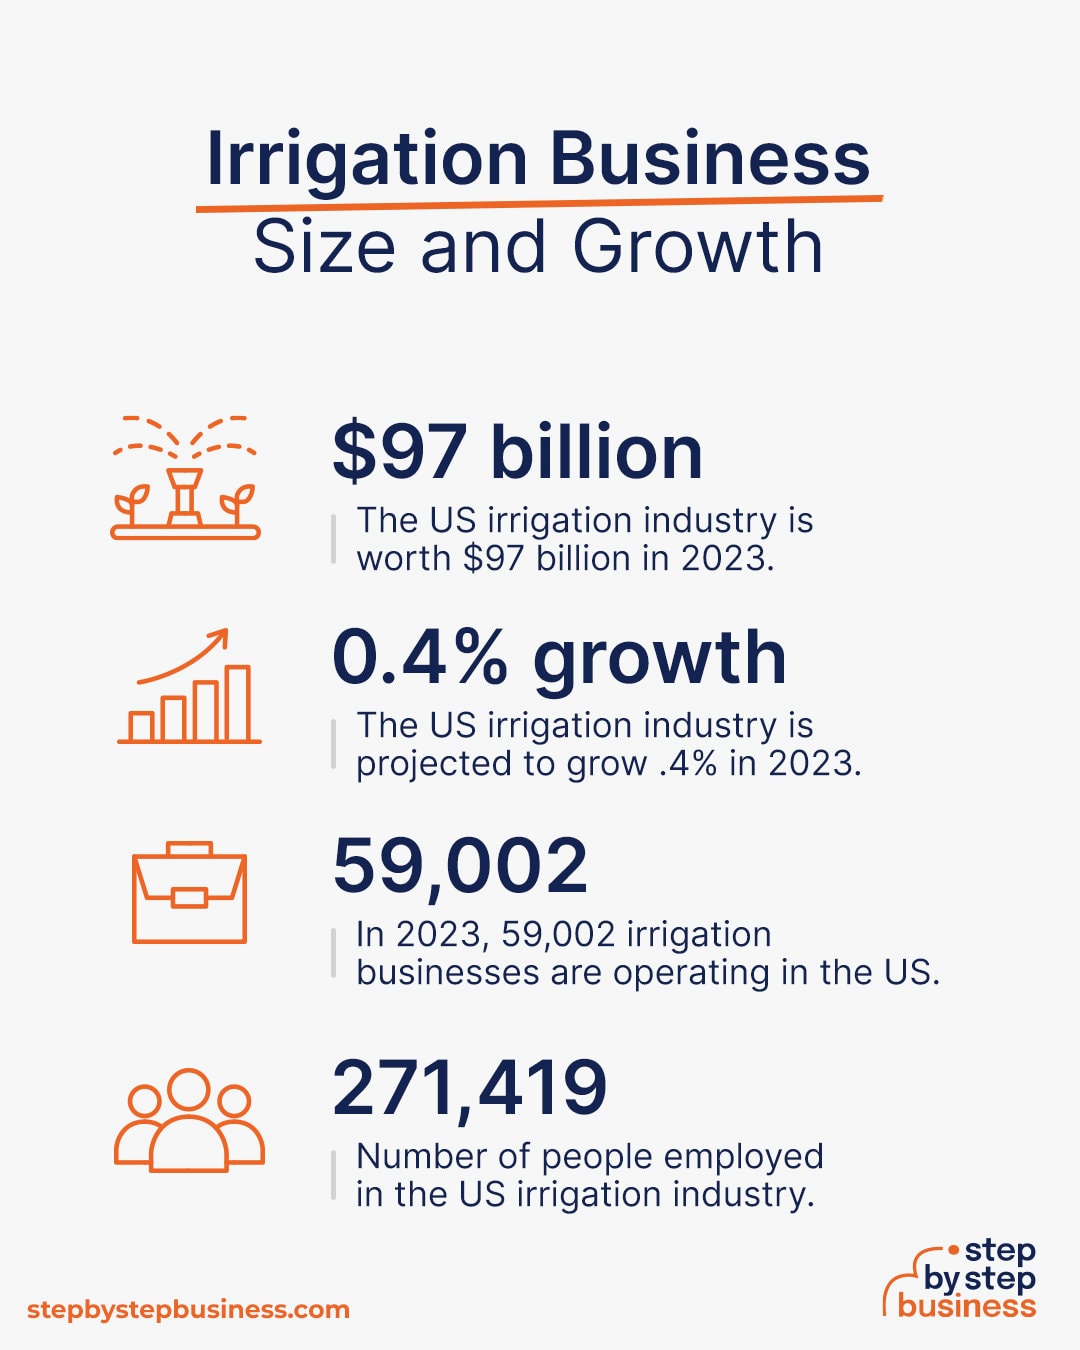 Irrigation industry size and growth